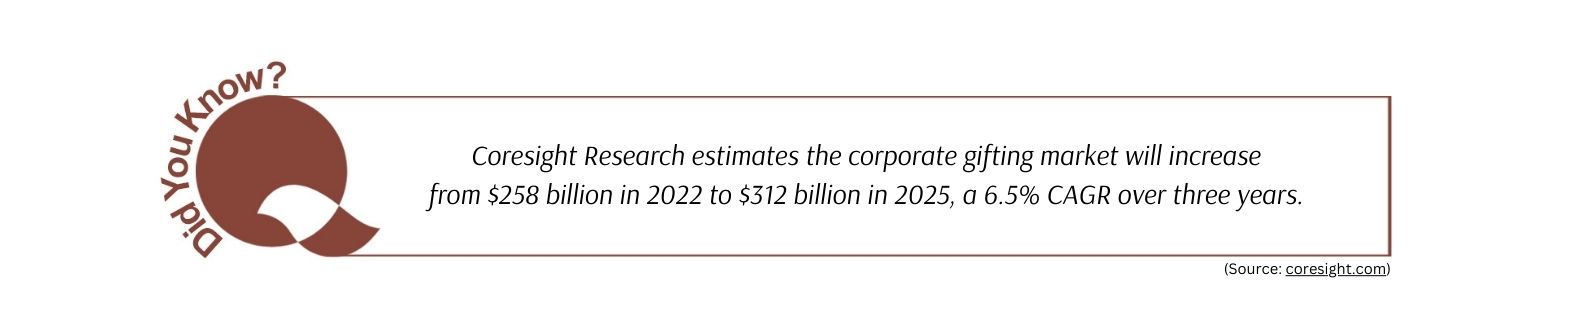 Coresight Research estimates the market will increase from $258 billion in 2022 to $312 billion in 2025, a 6.5% CAGR over three years.